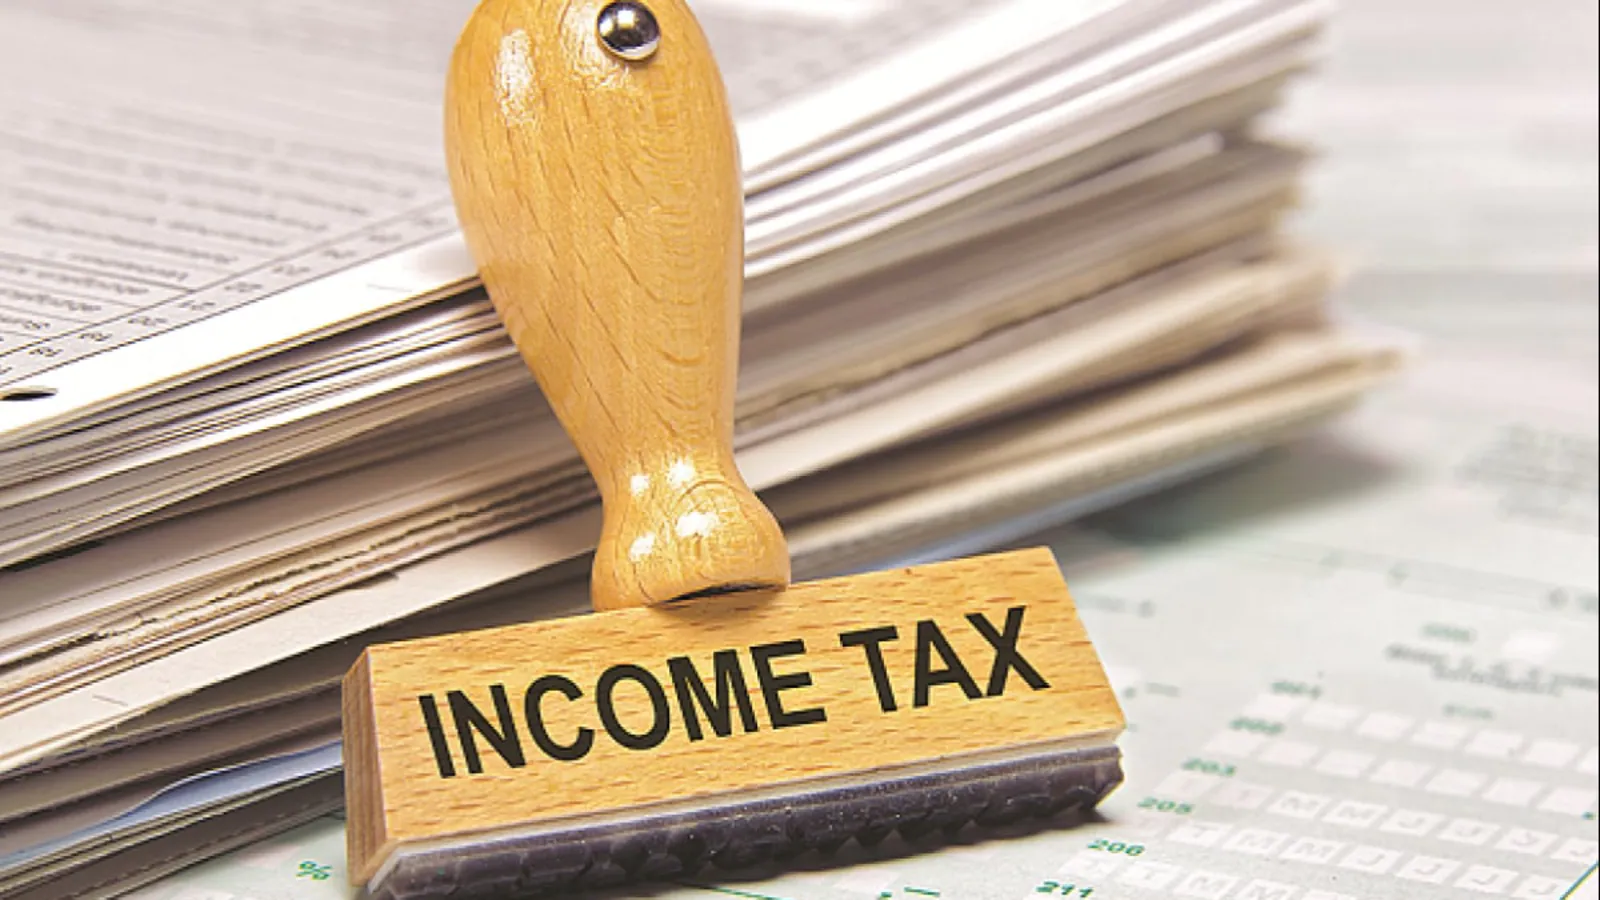 New tax rules to kick in from April 1. See what is going to change